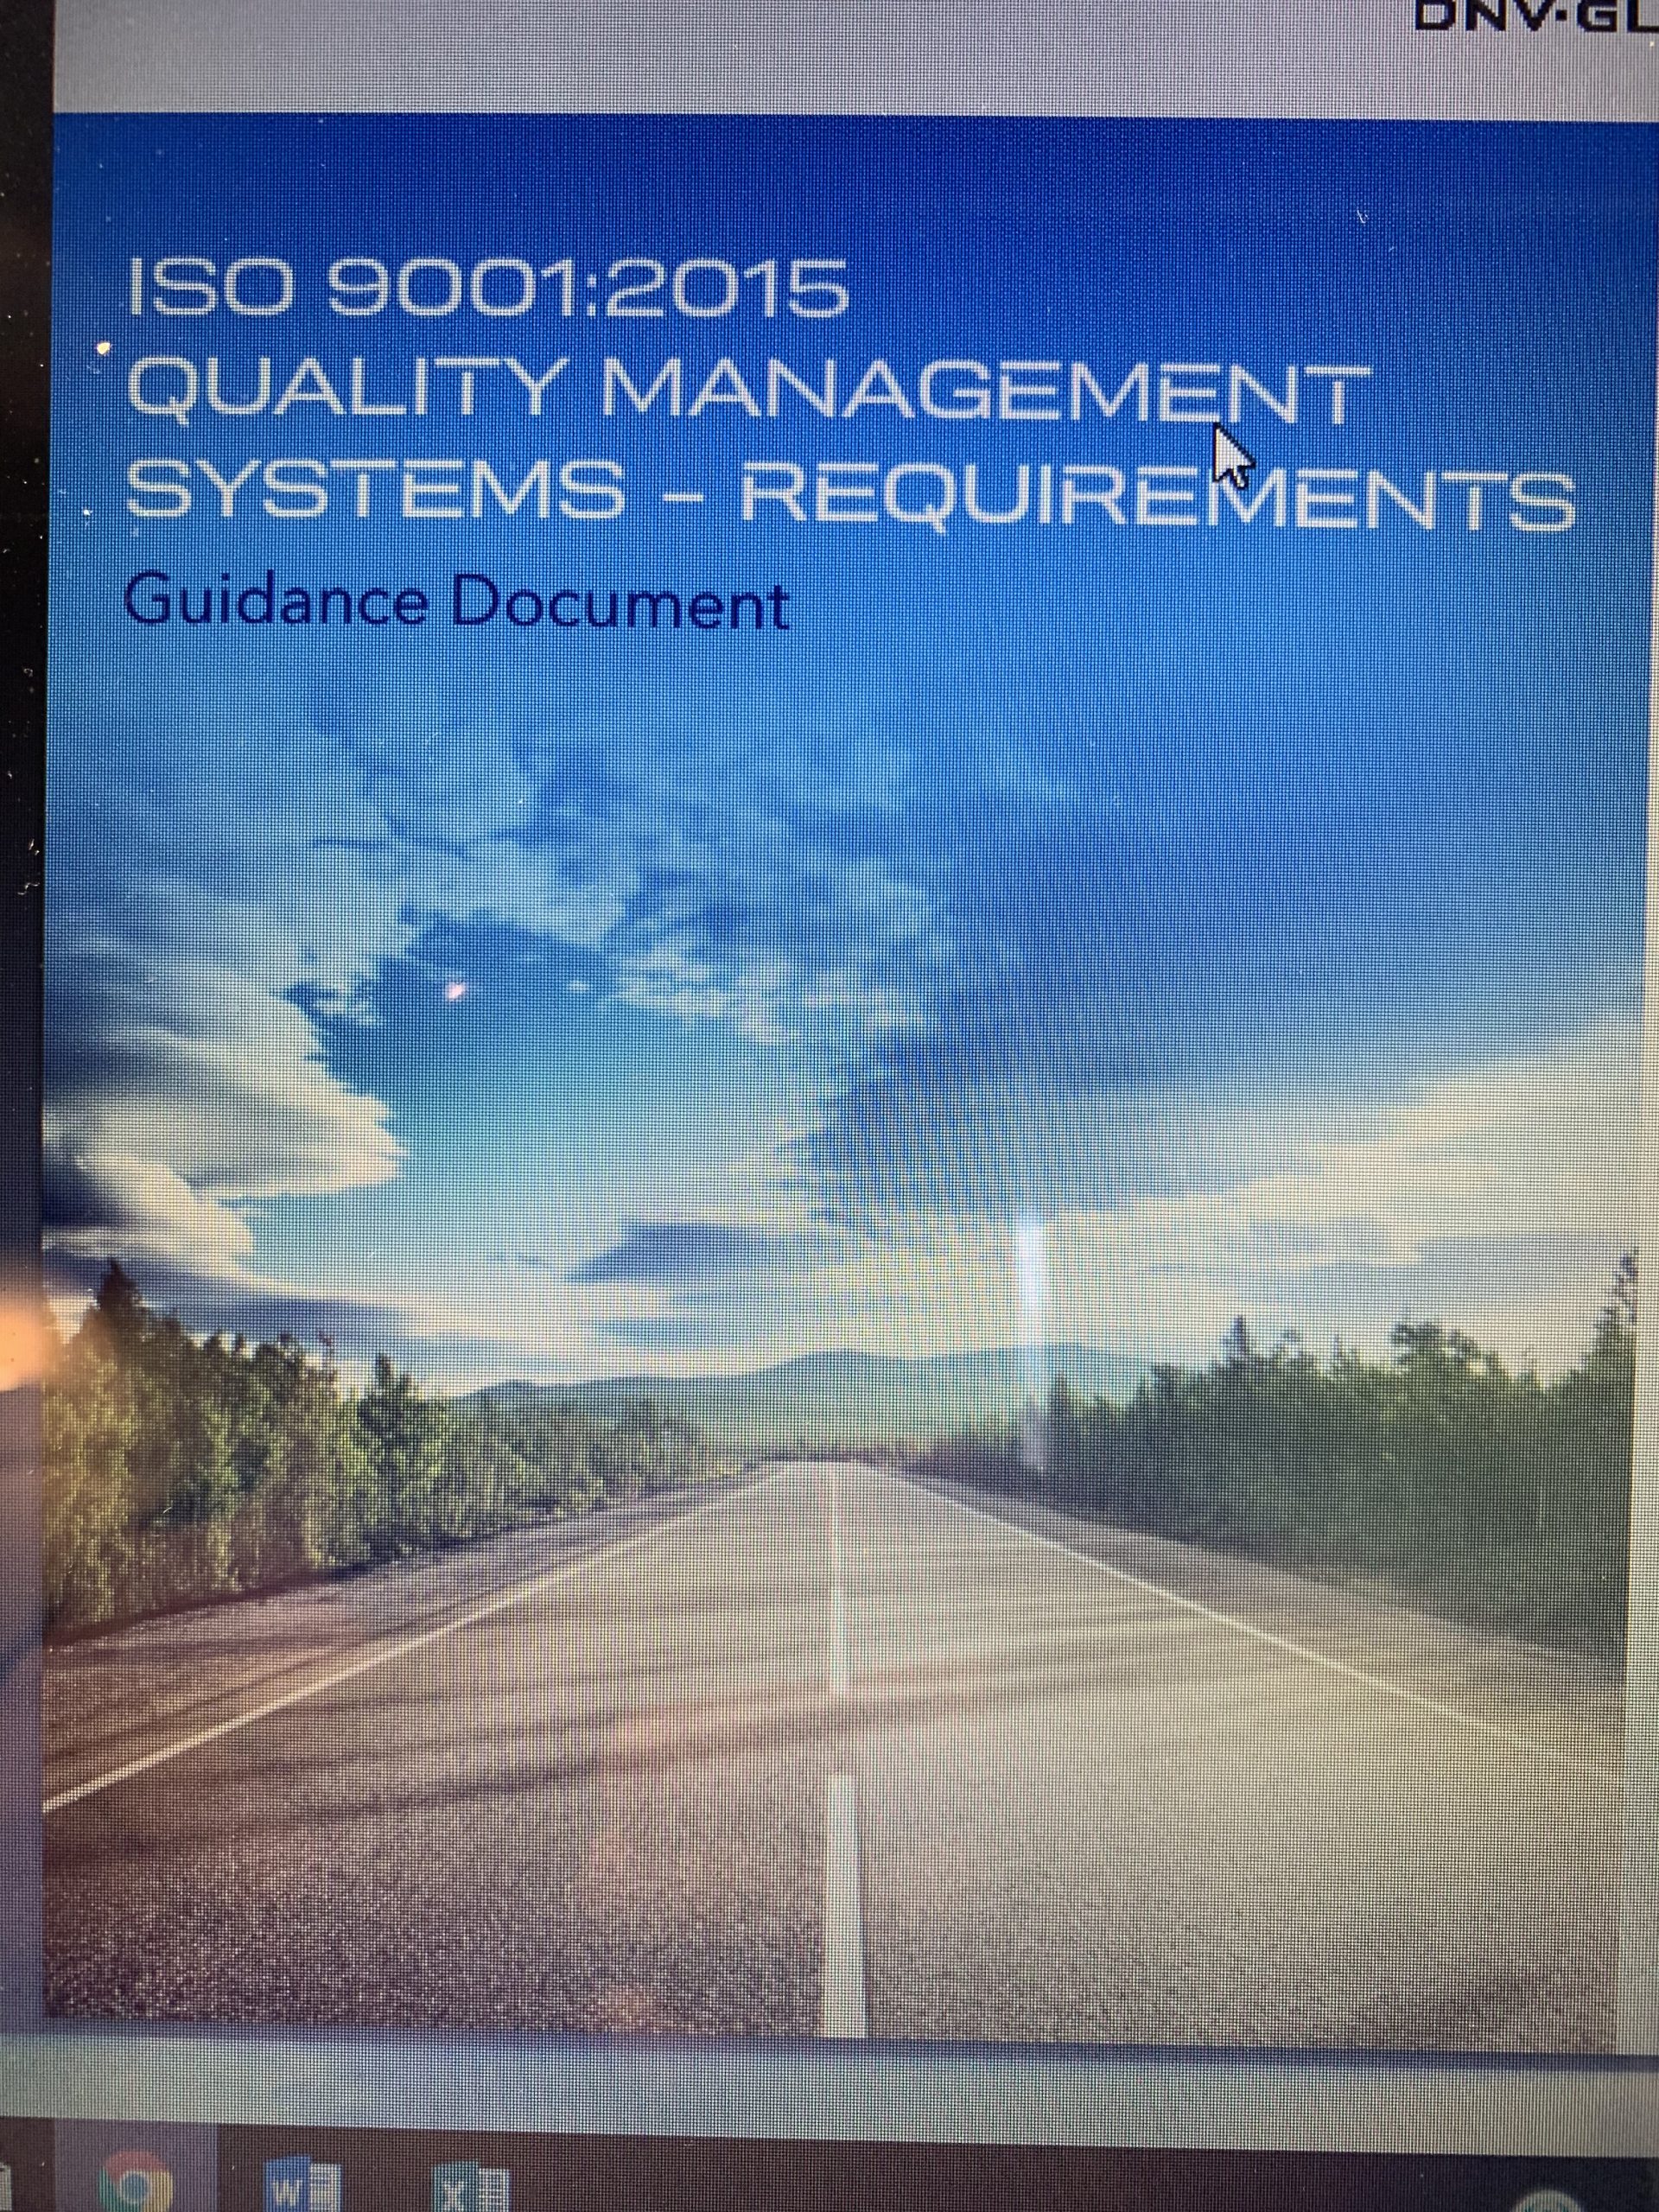 PROJECTS RF USA, Image 2. Support material, ISO9001:2015 Standard, Quality Management Systems Requeriments, Guidance Document (03/19/2019)